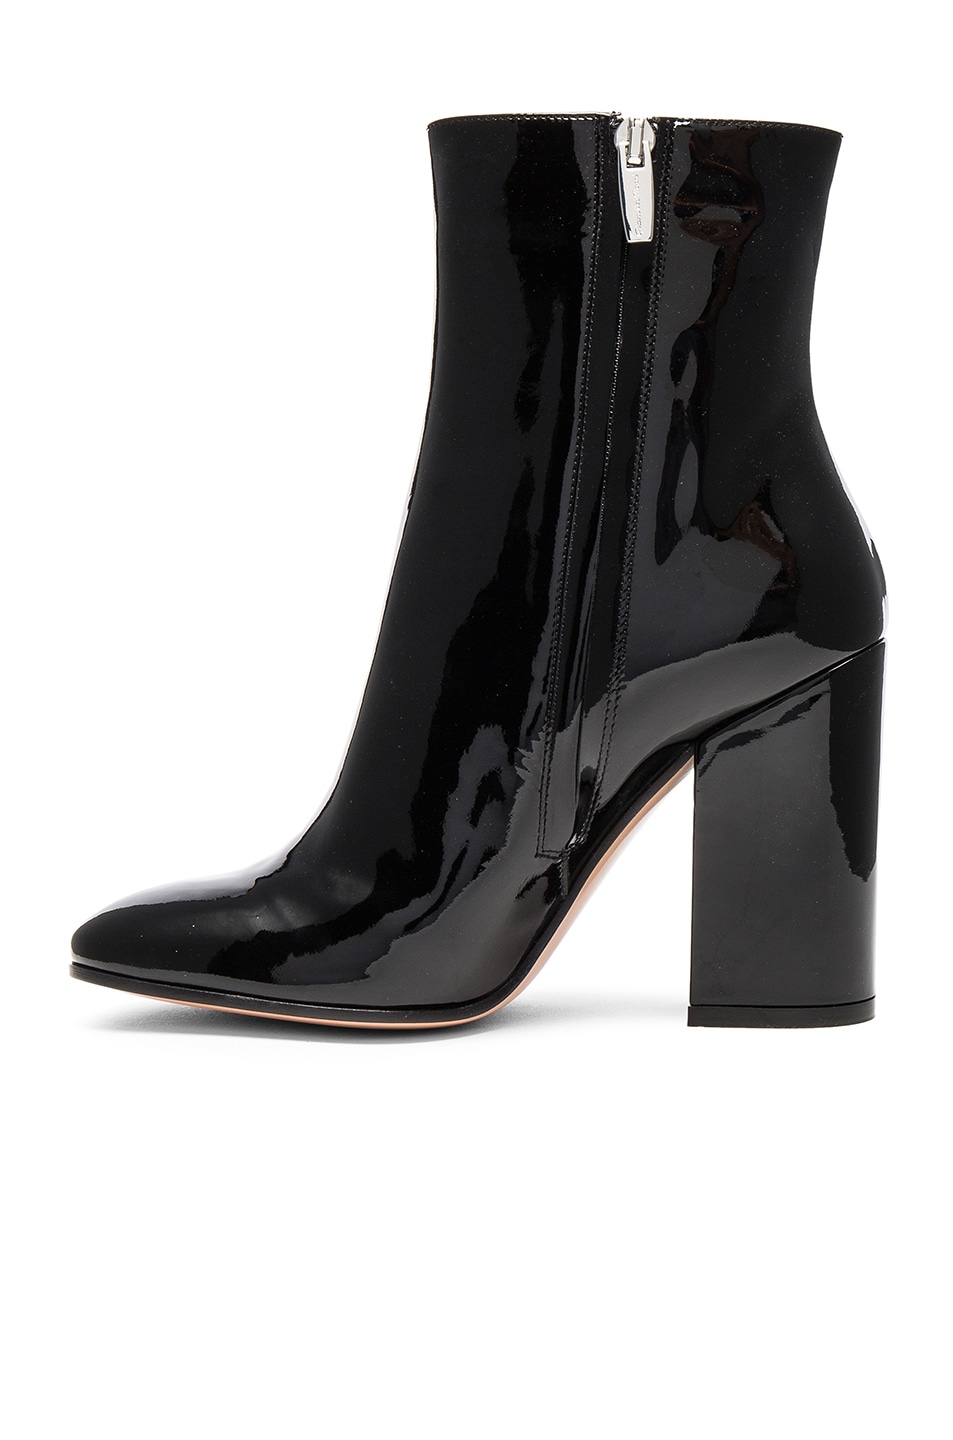 GIANVITO ROSSI Patent Leather Rolling High Booties in Black | ModeSens